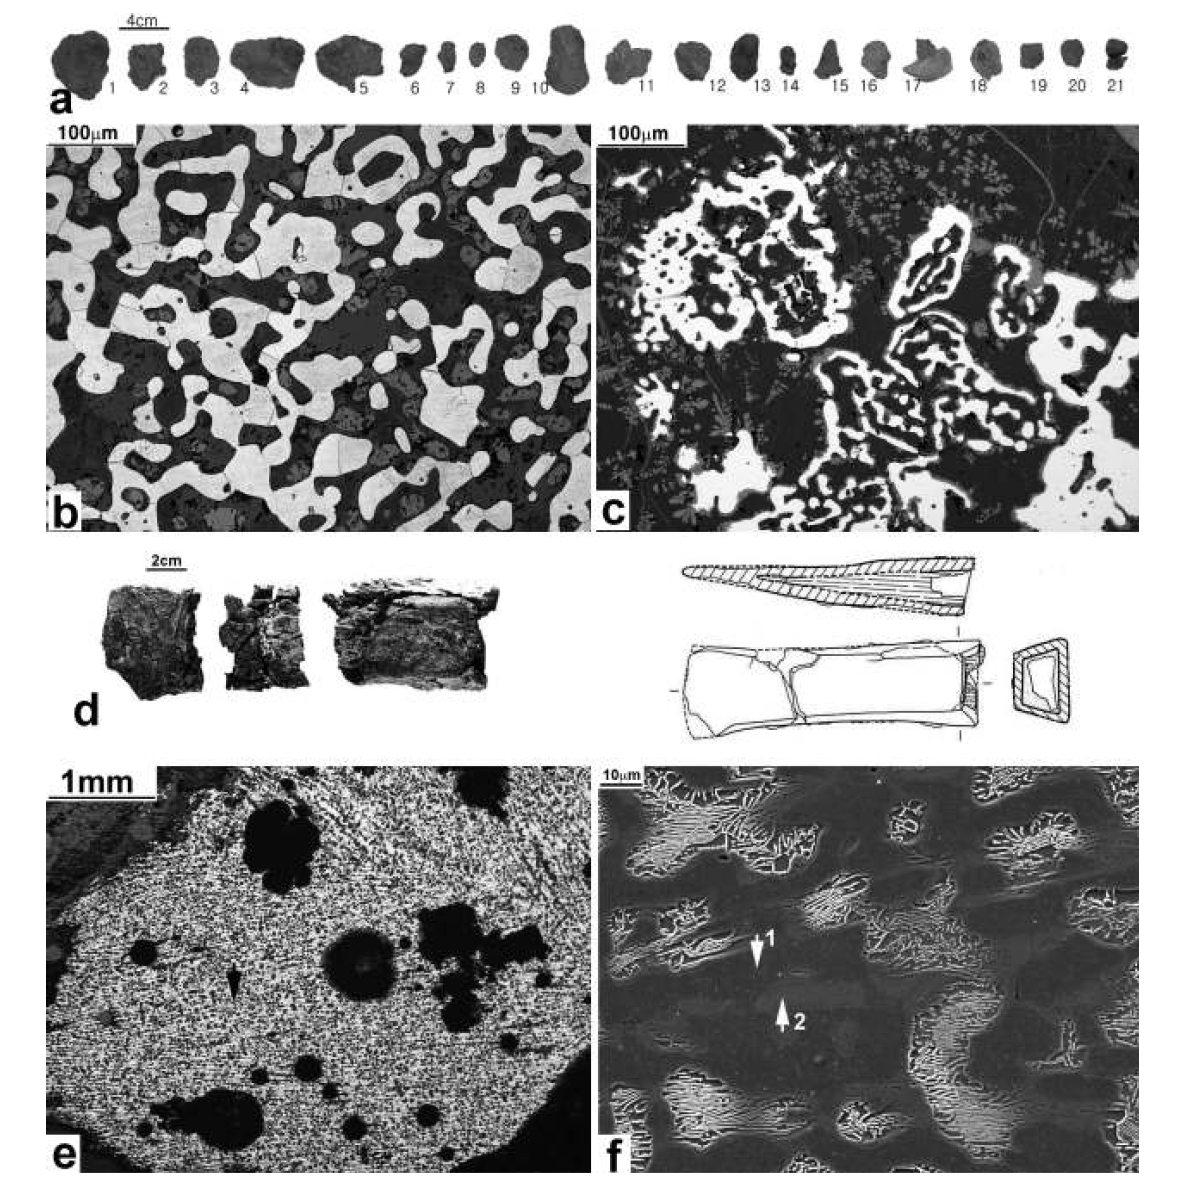 Iron objects and their microstructures providing clues for the estimation of smelting technology. (a) Iron objects and iron making wastes from a Unified Silla site at Gyongju; (b),(c) optical micrographs showing microstructures of two of the objects shown in (a); (d) iron object from a Gaya site at Gimhae; (e),(f) Optical and SEM micrographs showing the structure of the object in (d).